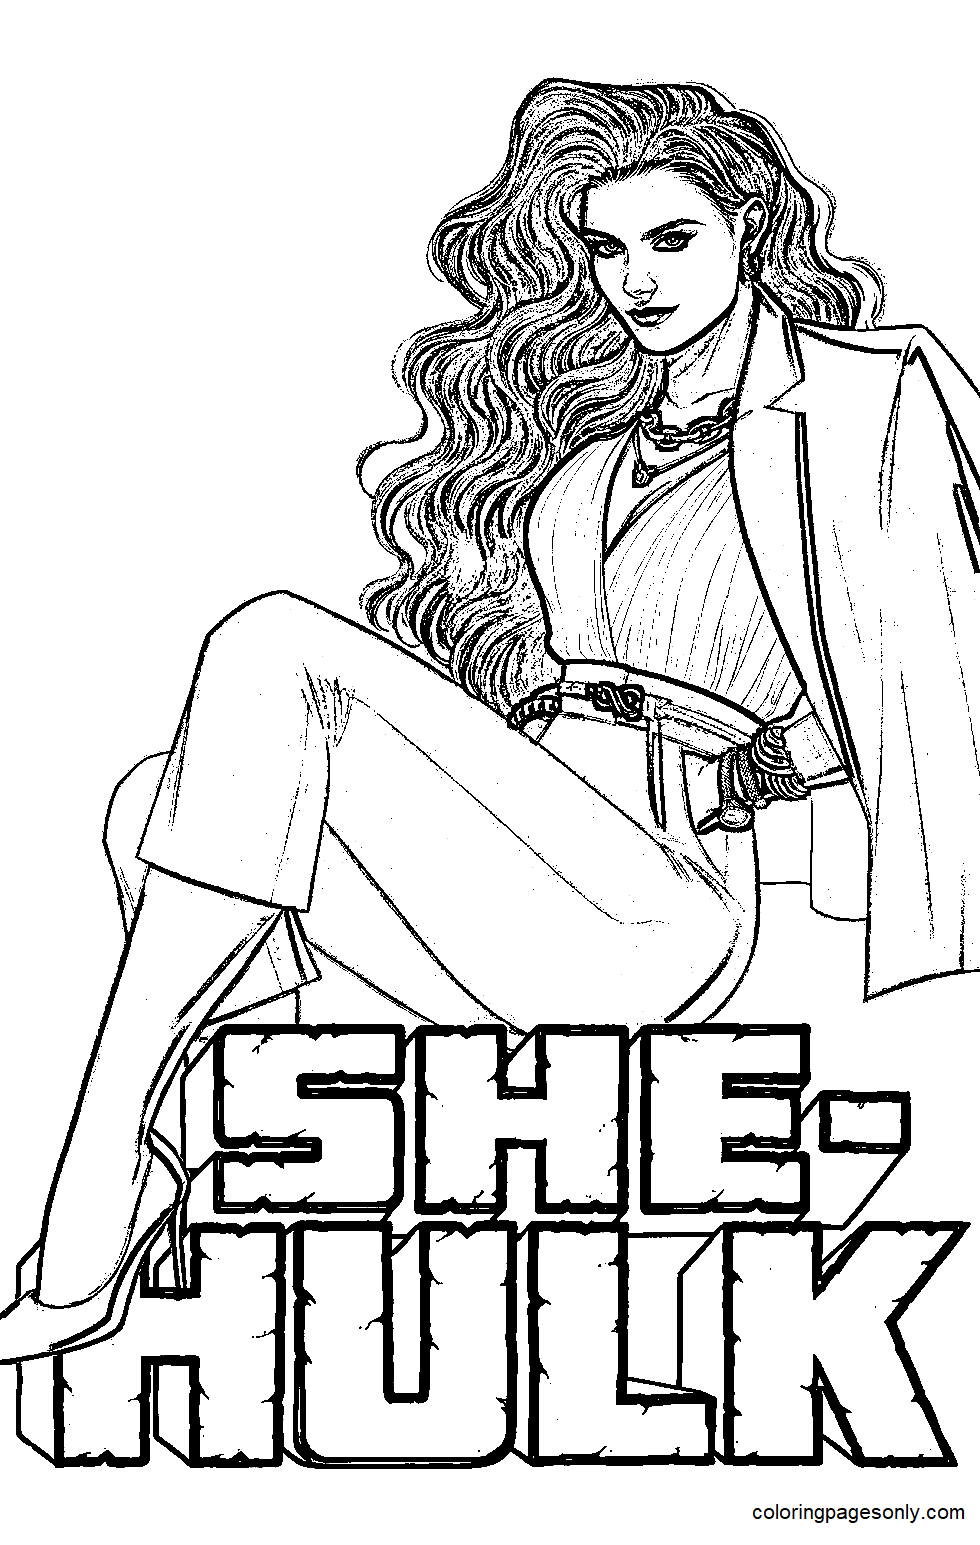 She-Hulk Coloring Pages Printable for Free Download